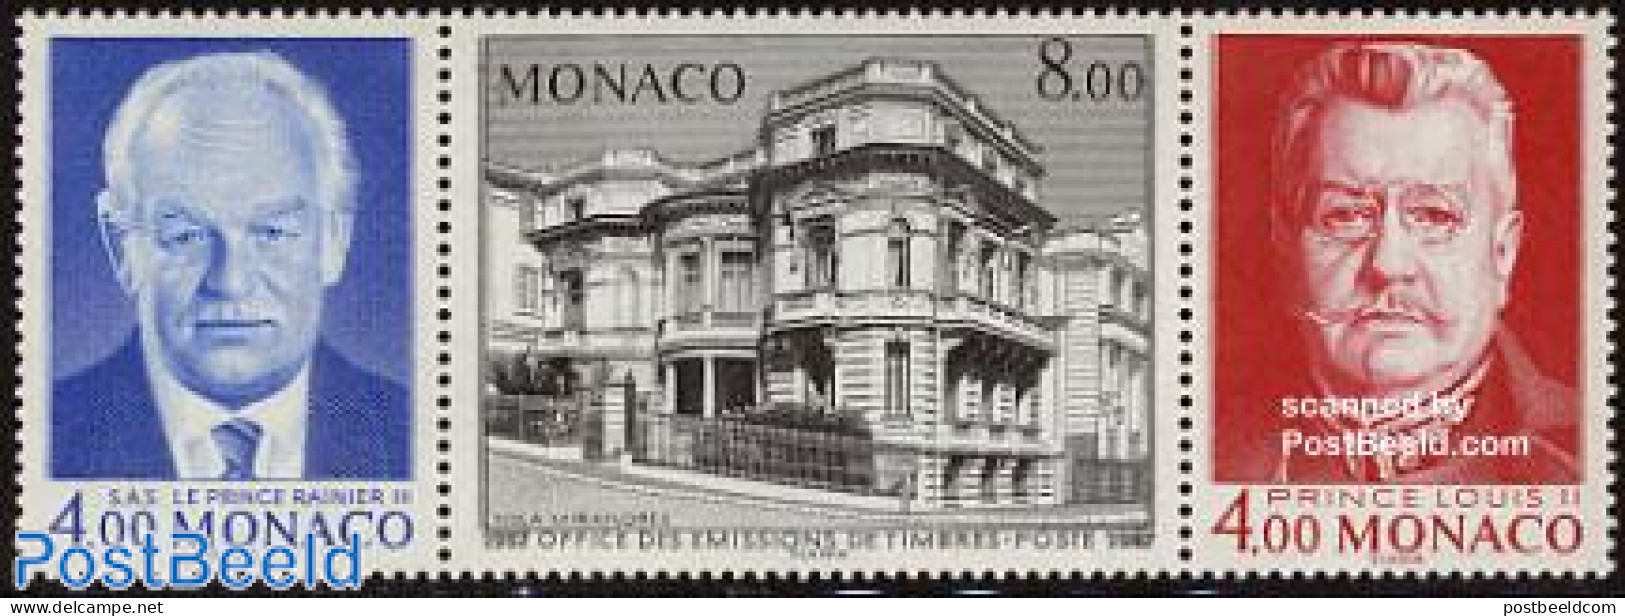 Monaco 1987 Stamp Bureau 3v [::], Mint NH, History - Kings & Queens (Royalty) - Philately - Art - Architecture - Nuevos